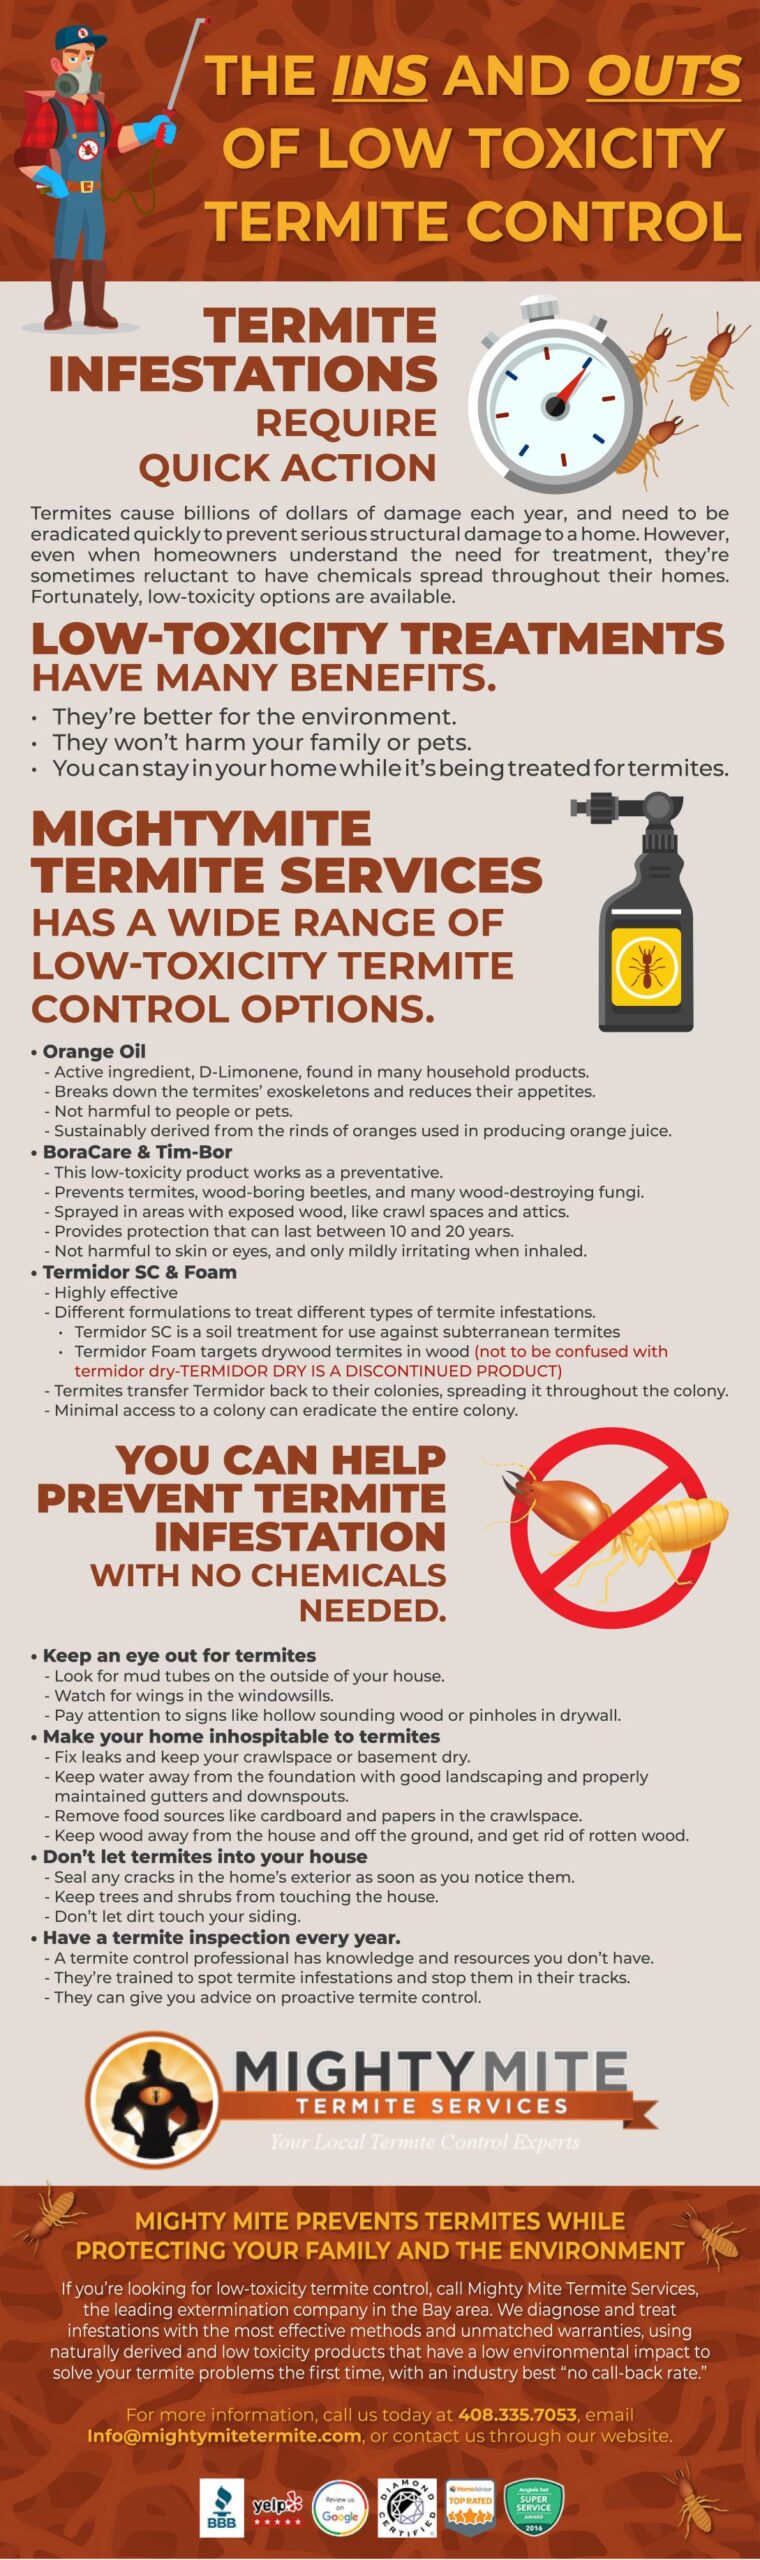 The INS and outs of low toxicity termite control logo